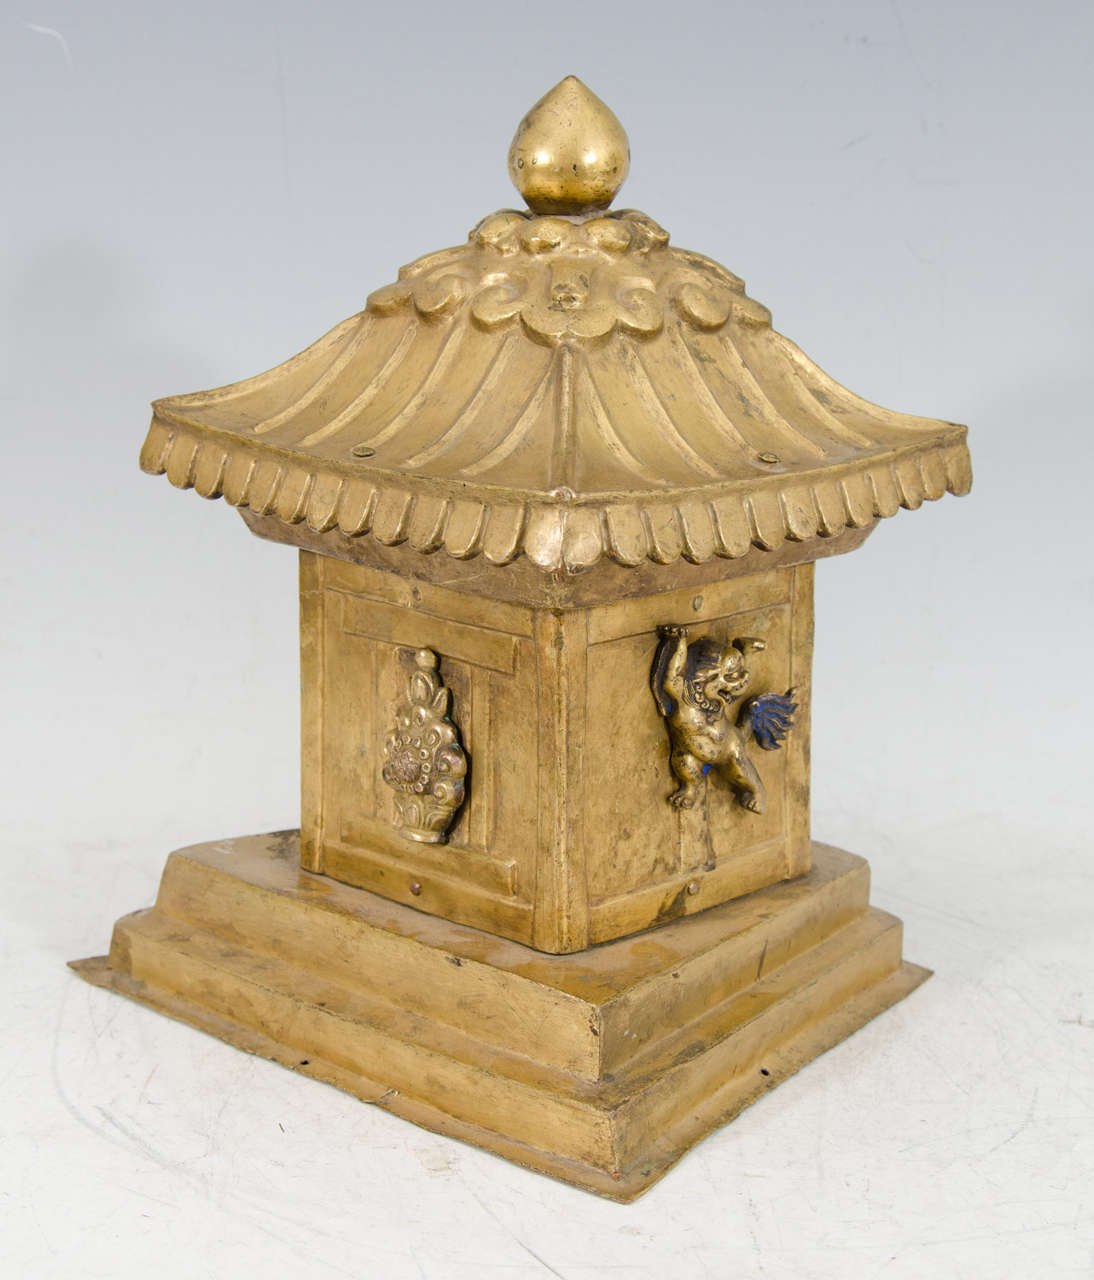 A late 18th or early 19th century Tibetan over-sized architectural gilt bronze reliquary top, shaped like a small temple or stupa. The front is mounted with a floral jewel and the sides have snow leopards raised on their back paws to support the